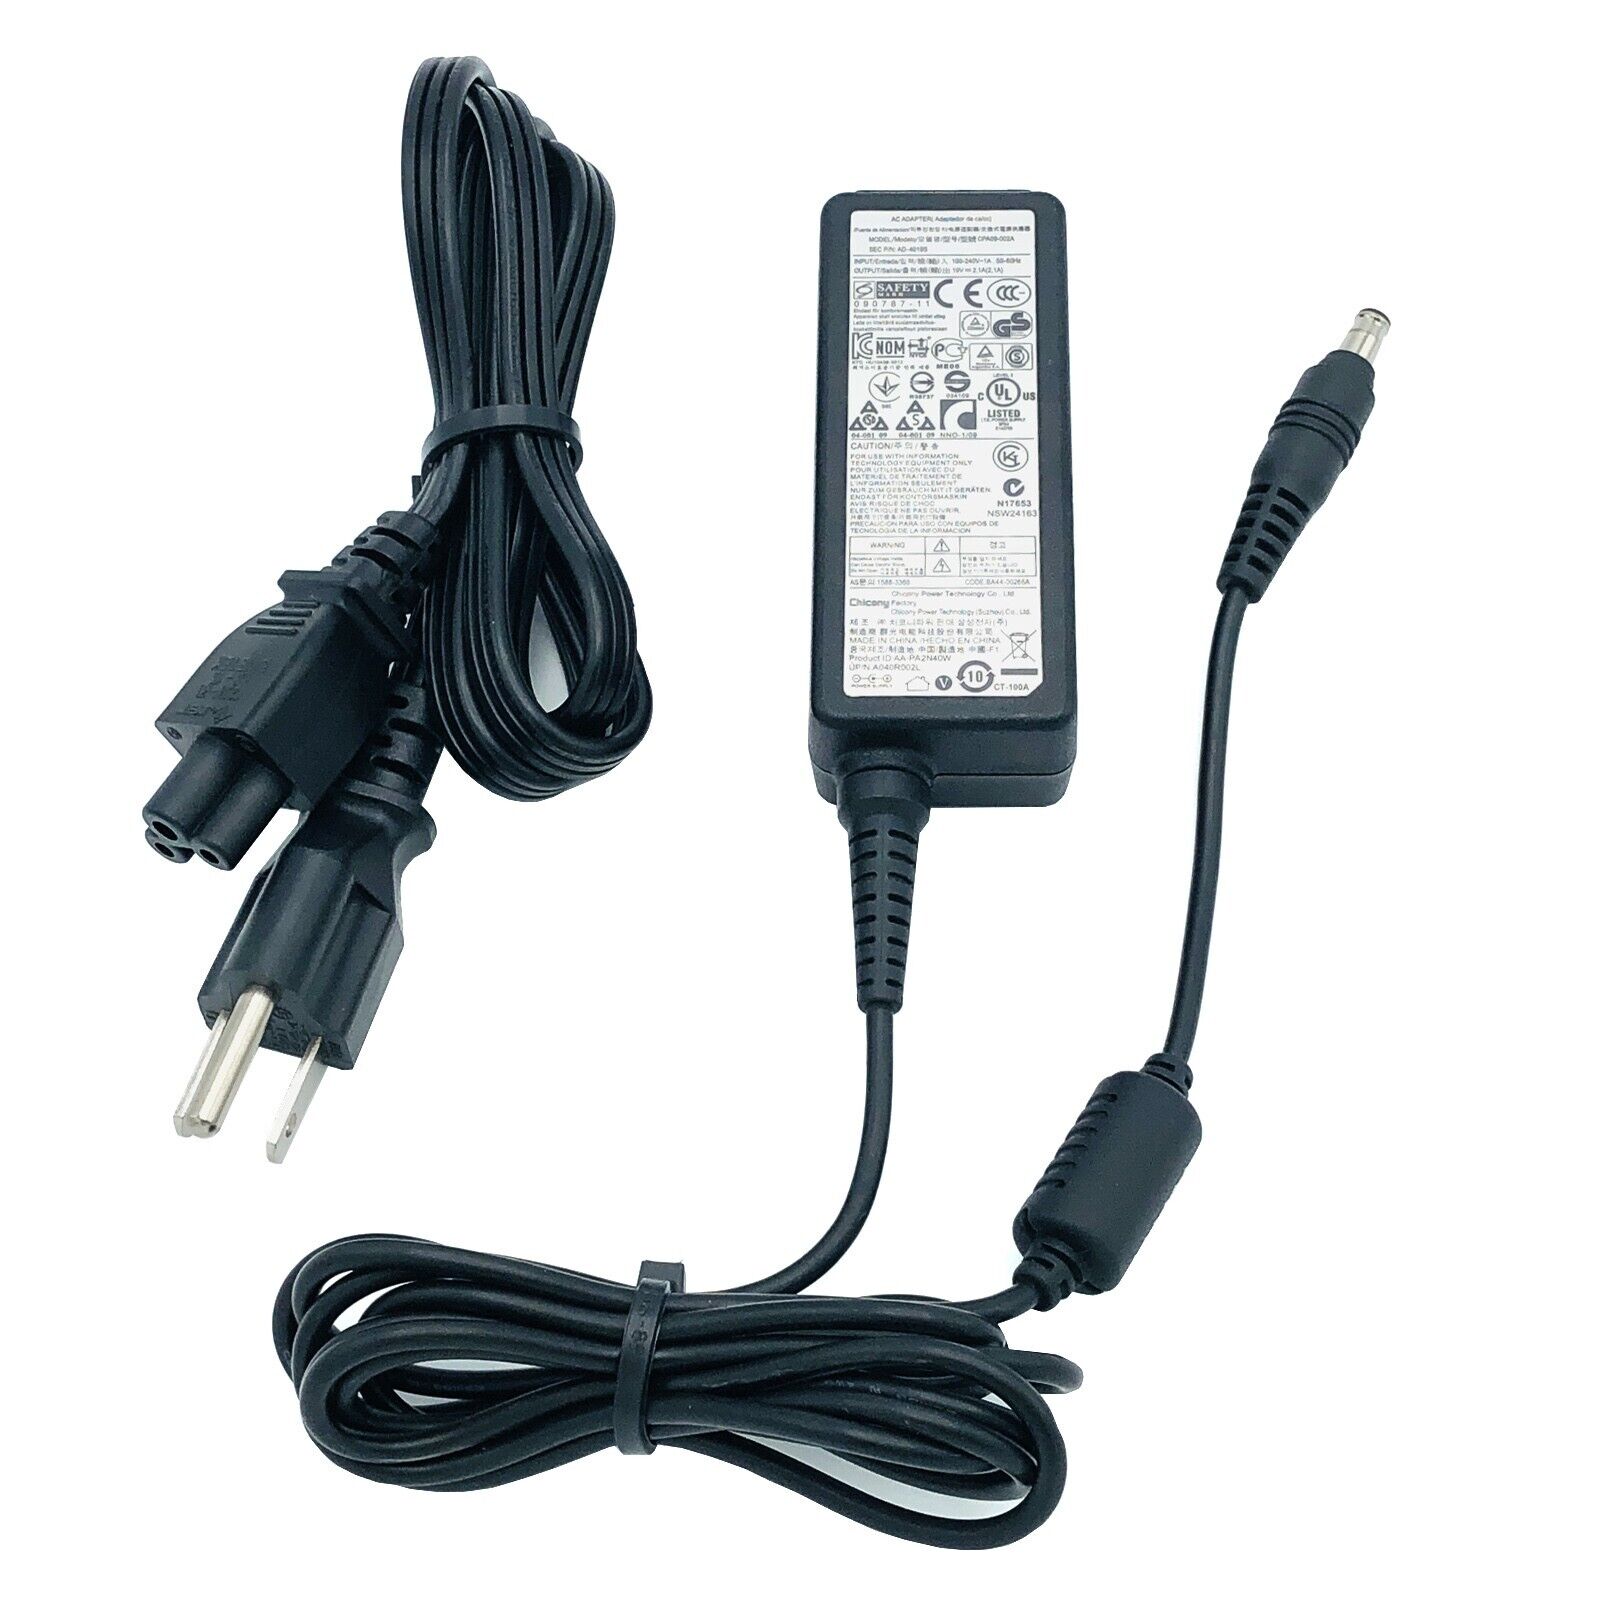 *Brand NEW*Genuine Chicony CPA09-002A 19V 2.1A AC Adapter AD-4019S w/Cord Power Supply